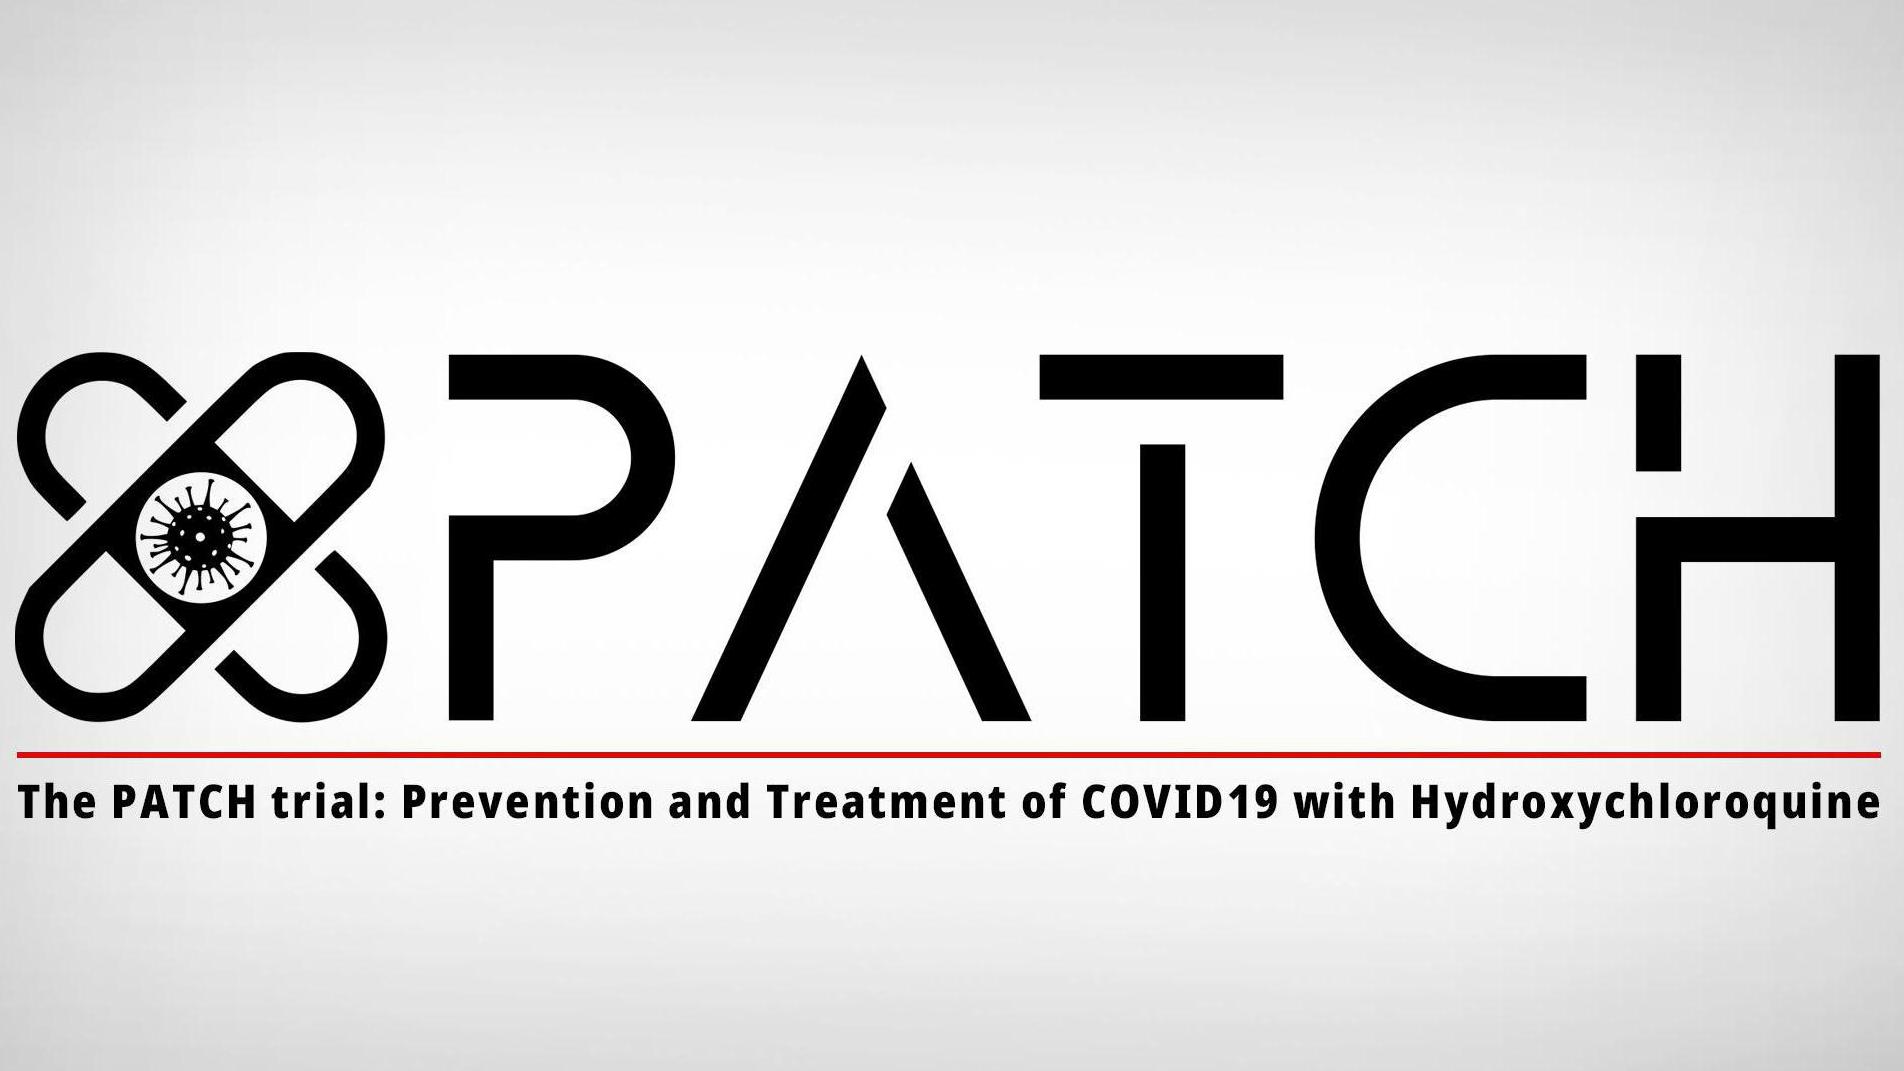 The PATCH trial for patients Quarantined at Home (Prevention and Treatment of COVID-19 with hydroxychloroquine)